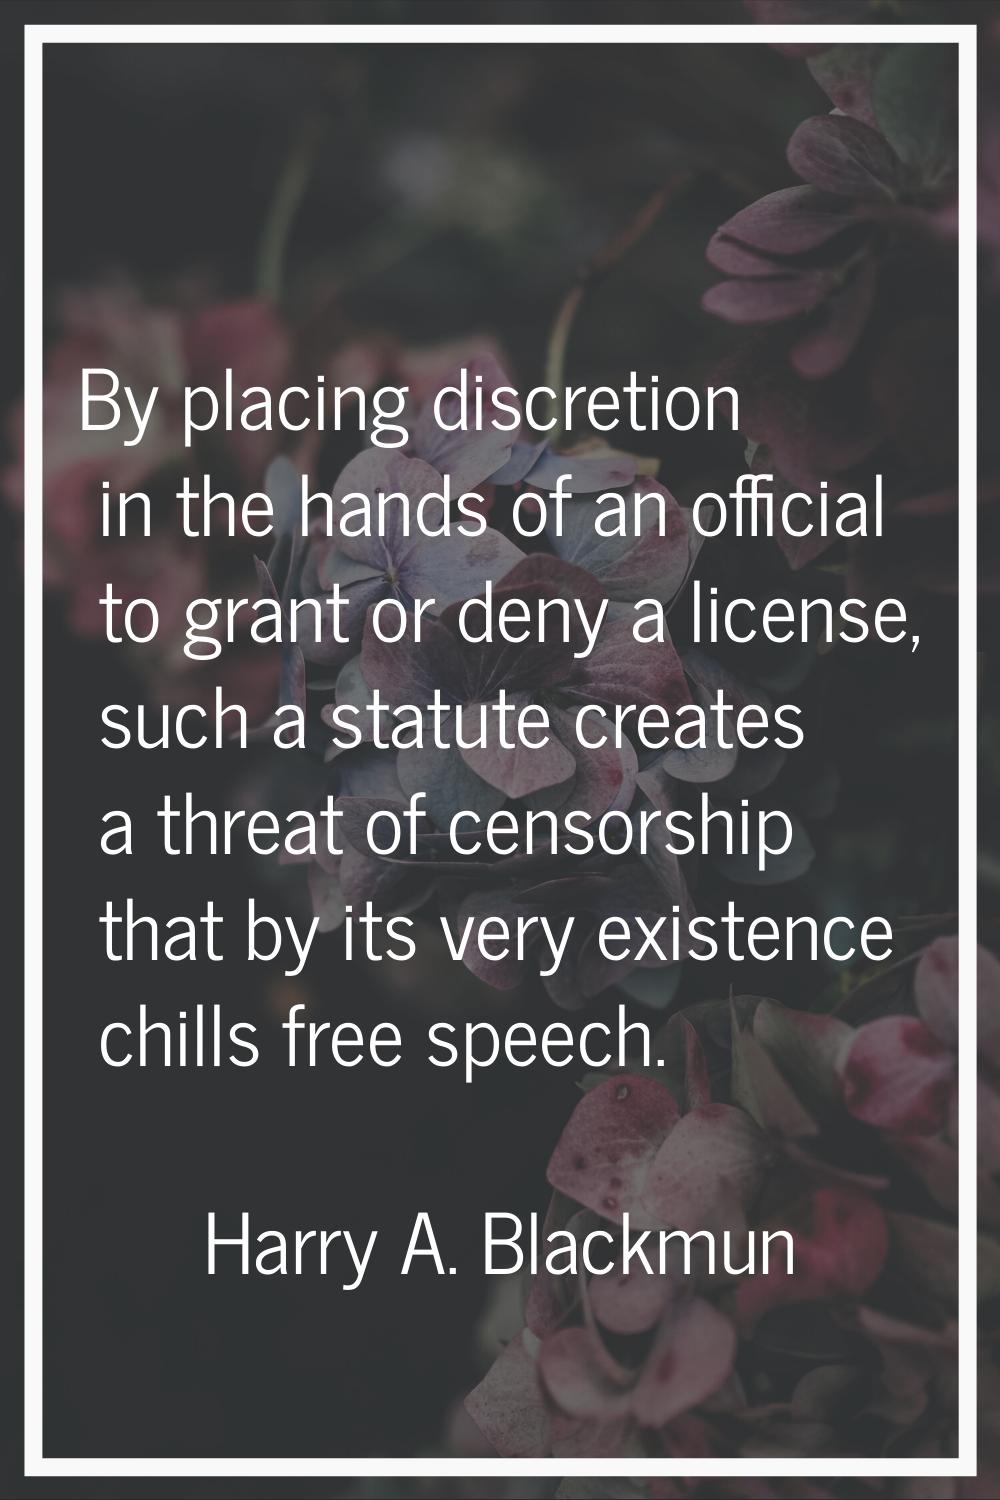 By placing discretion in the hands of an official to grant or deny a license, such a statute create